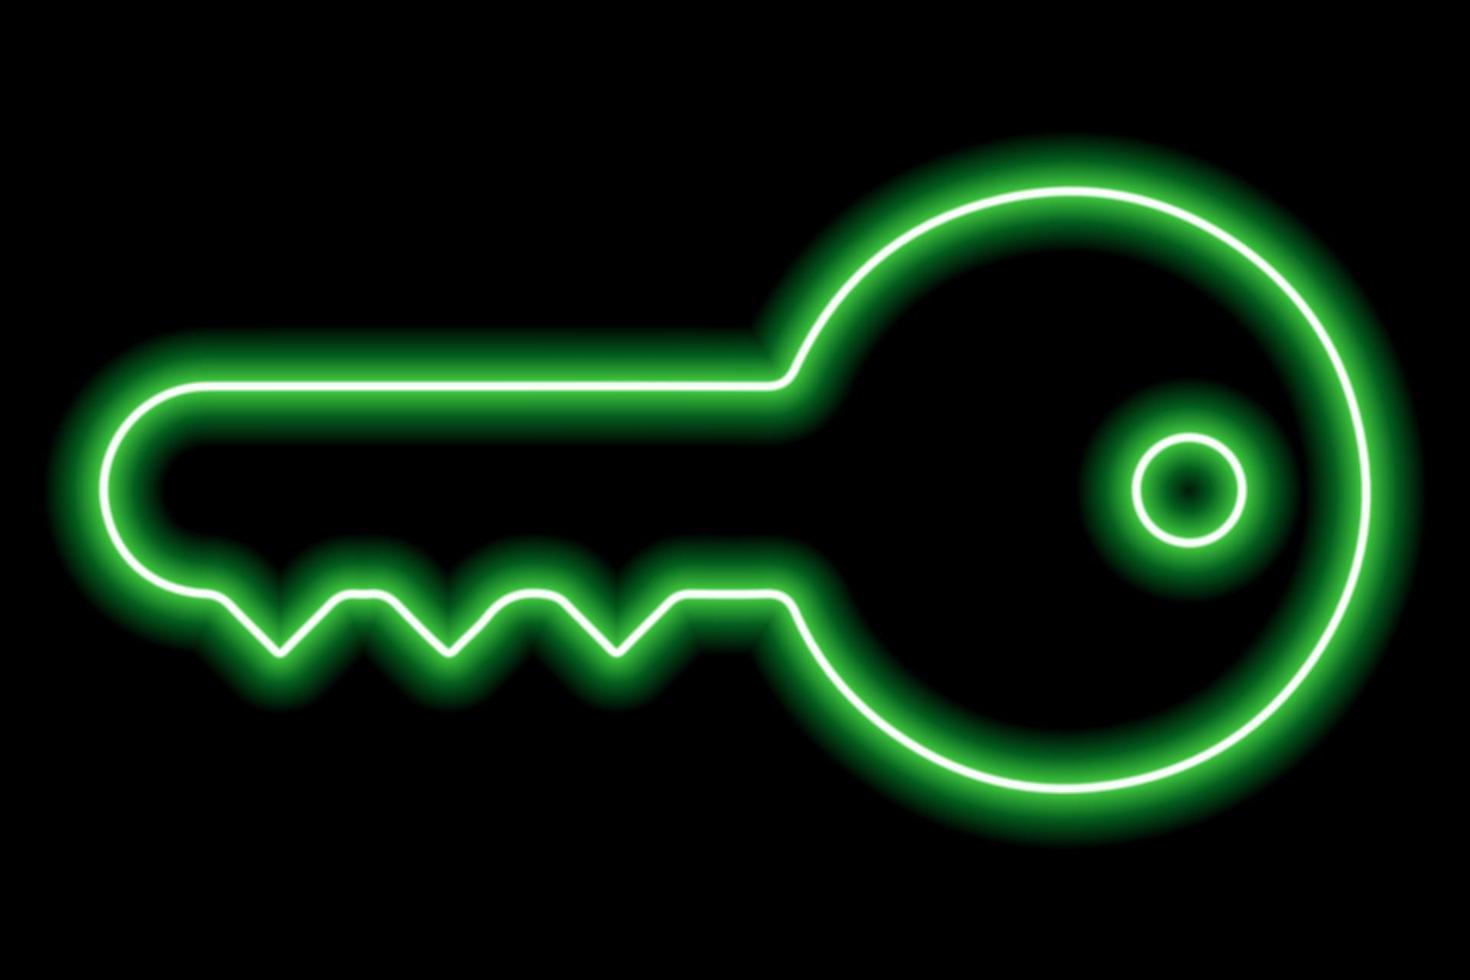 Simple metal wrench. Green neon outline on a black background. Illustration vector